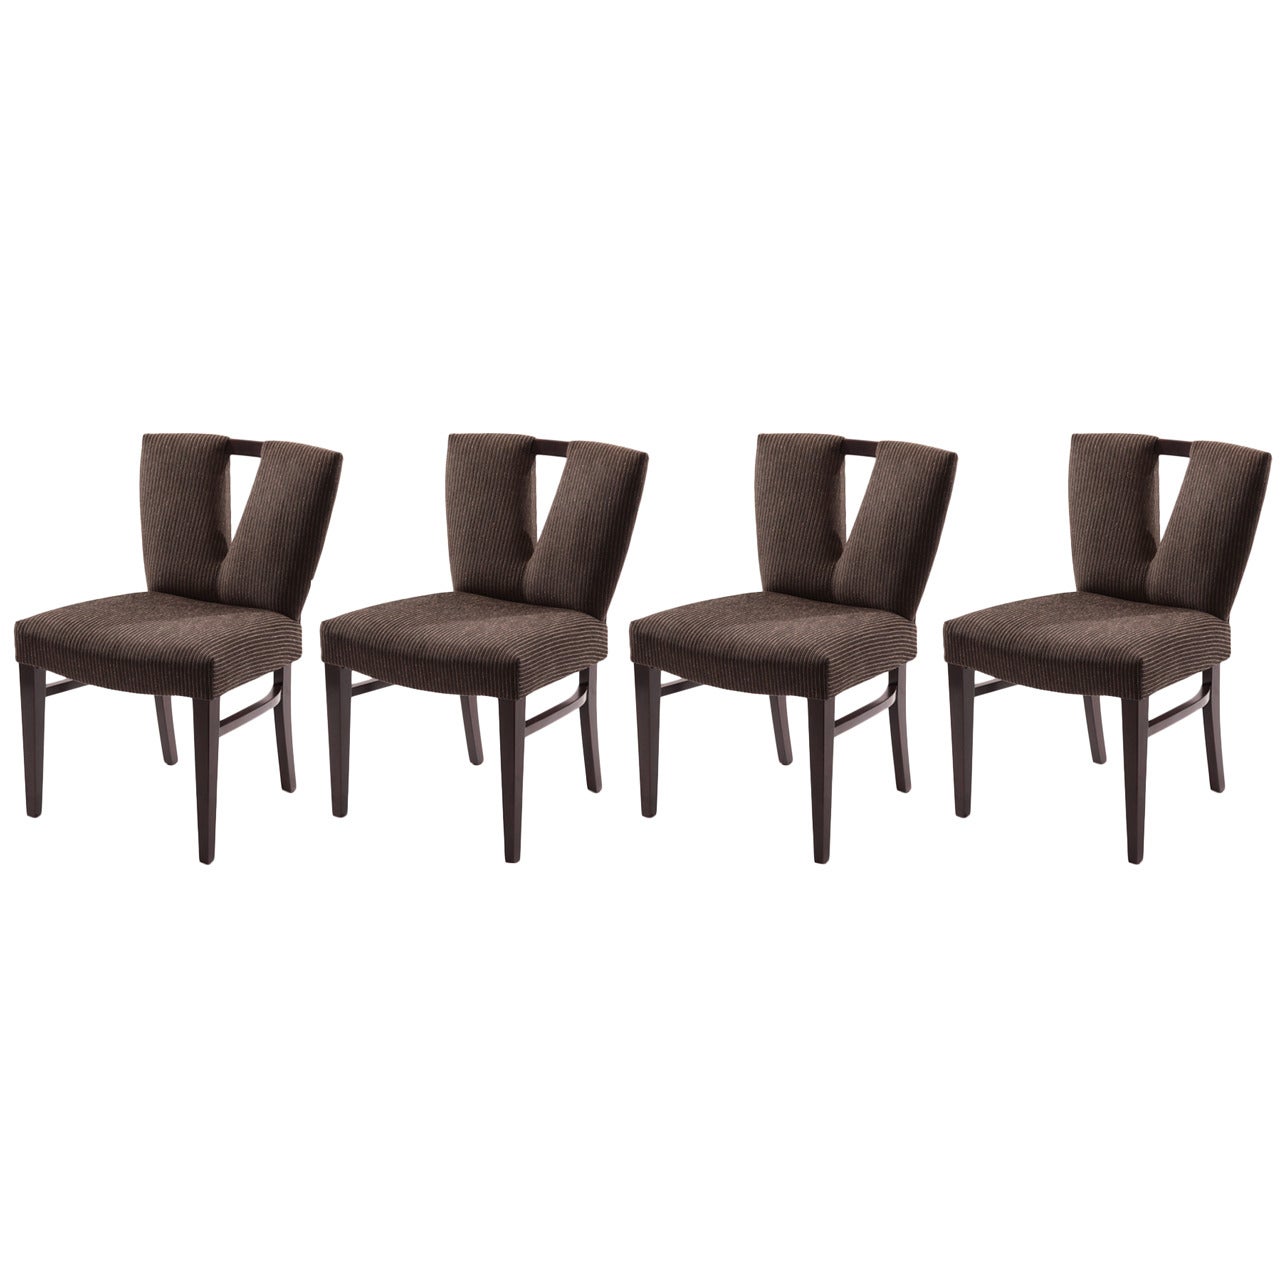 4 V Back Paul Frankl Dining Chairs